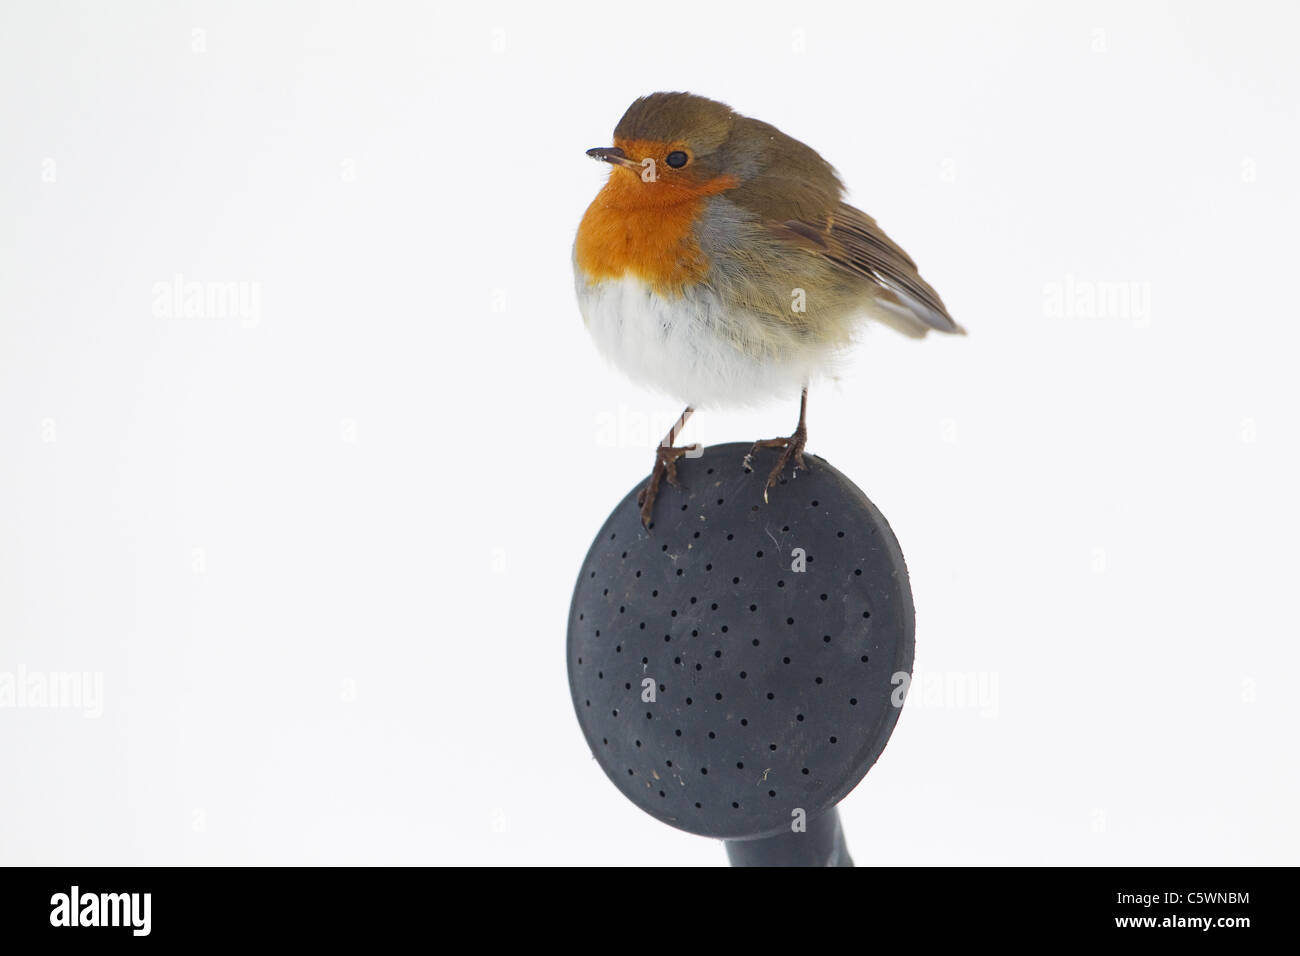 Robin (Erithacus rubecula), adult perched on watering can spout in snow. Stock Photo